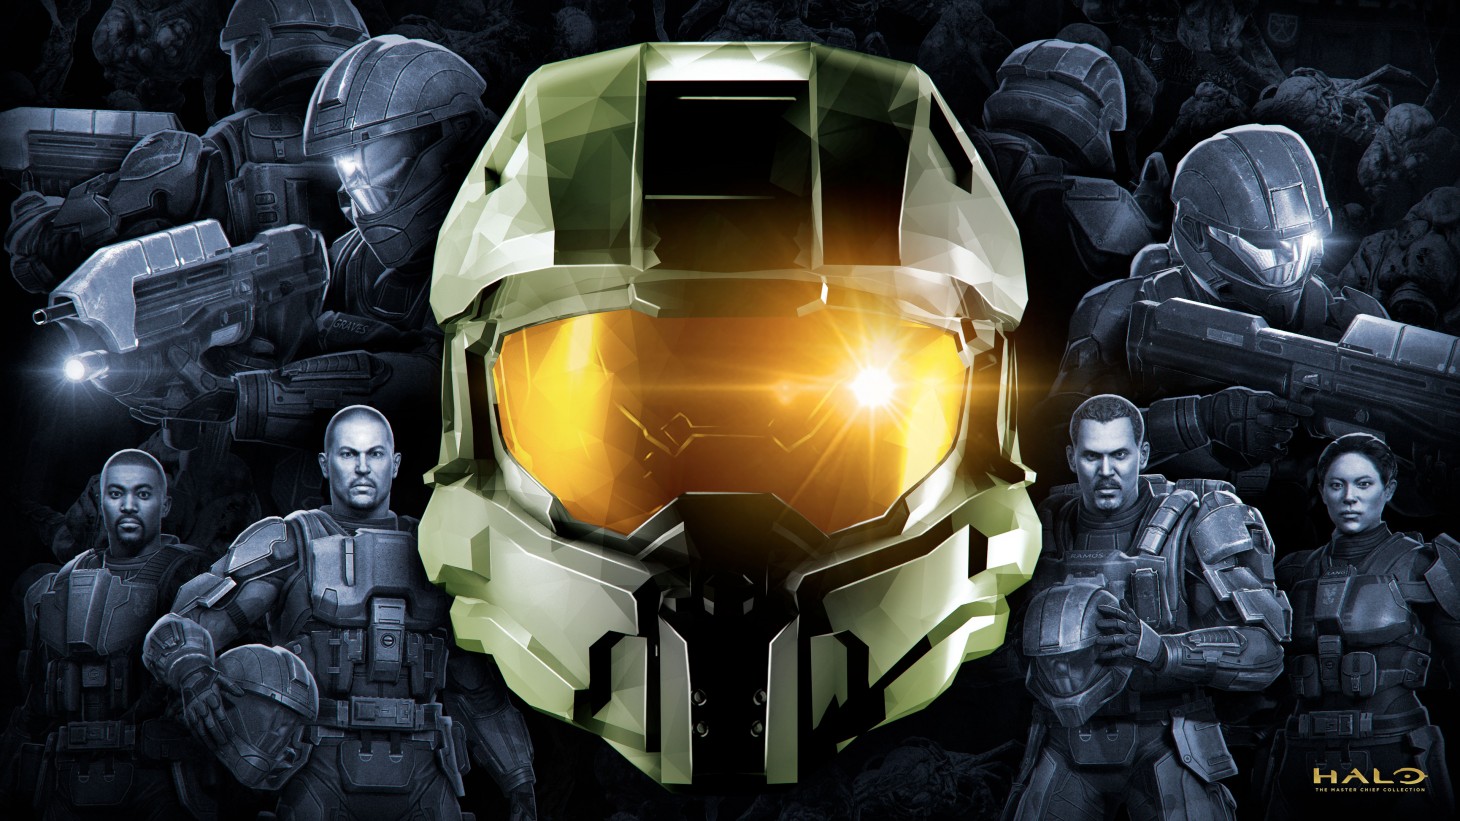 Master chief collection русификатор. Игра Halo Waypoint. Halo: the Master Chief collection. Хало MCC. Halo Master Chief collection MCC.